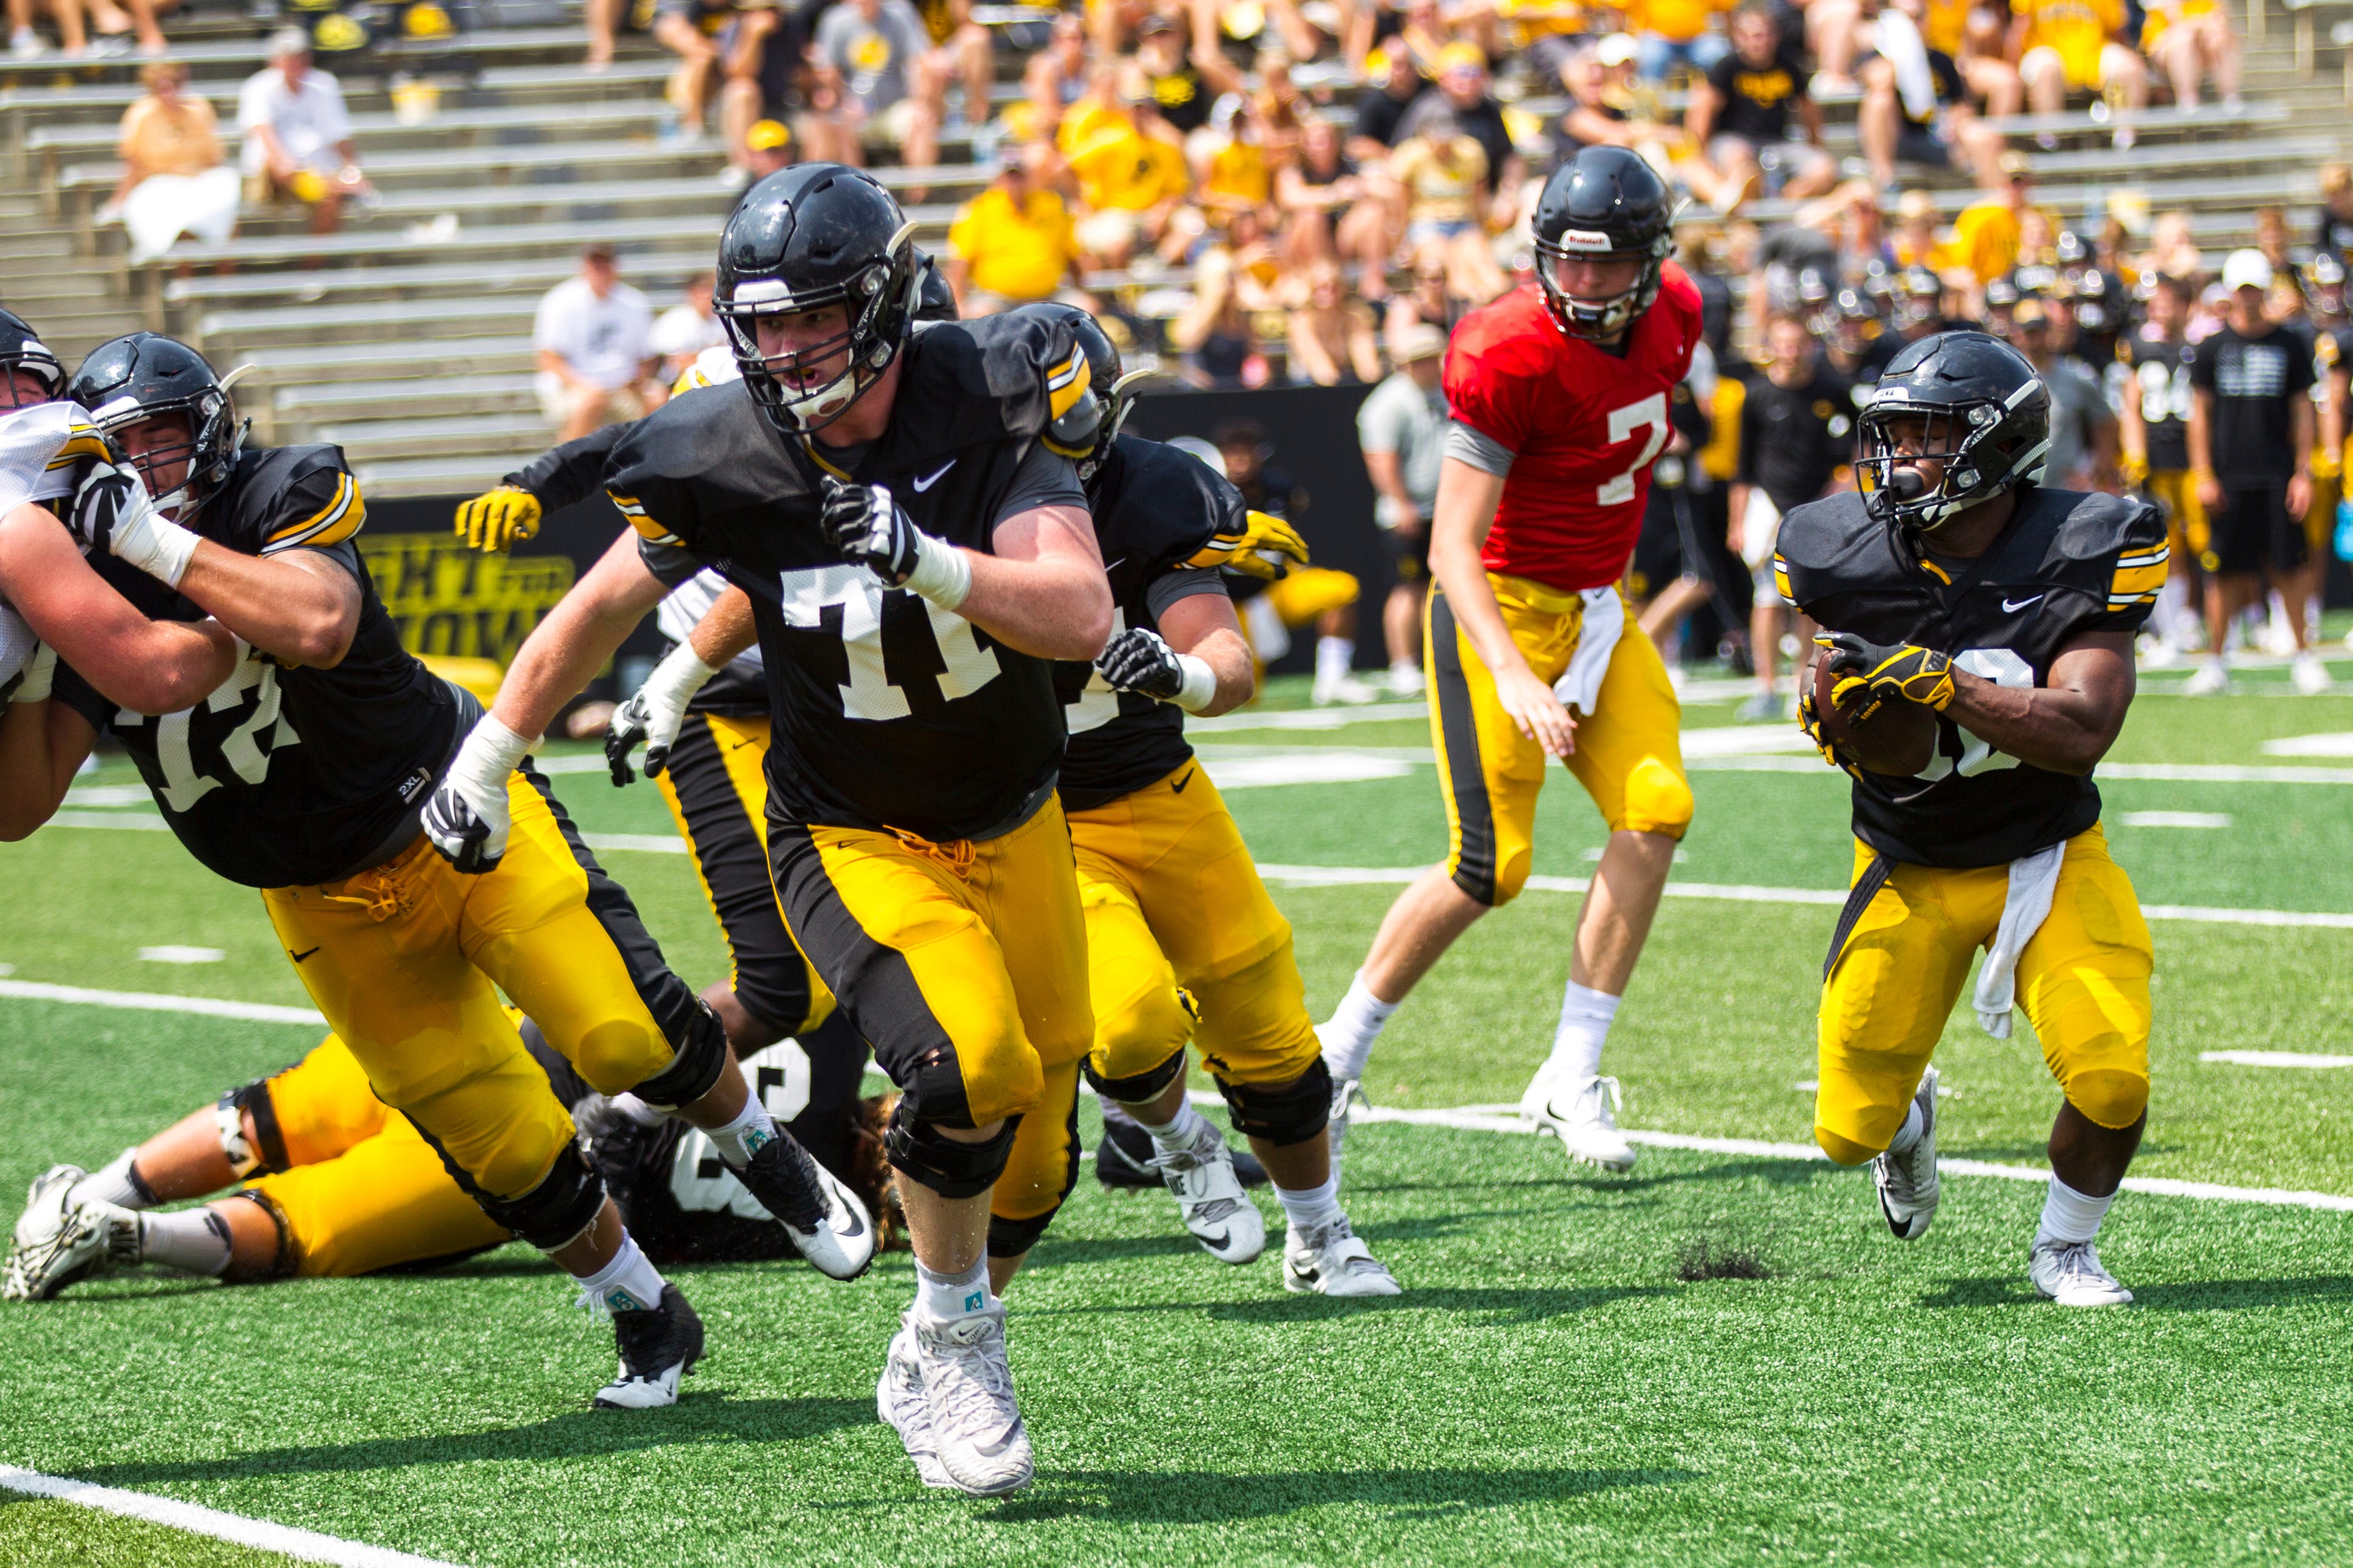 Iowa offensive lineman Mark Kallenberger (71) sets up a block for running back Mekhi Sargent (10) during a Kids Day practice on Saturday, Aug. 11, 2018, at Kinnick Stadium in Iowa City.